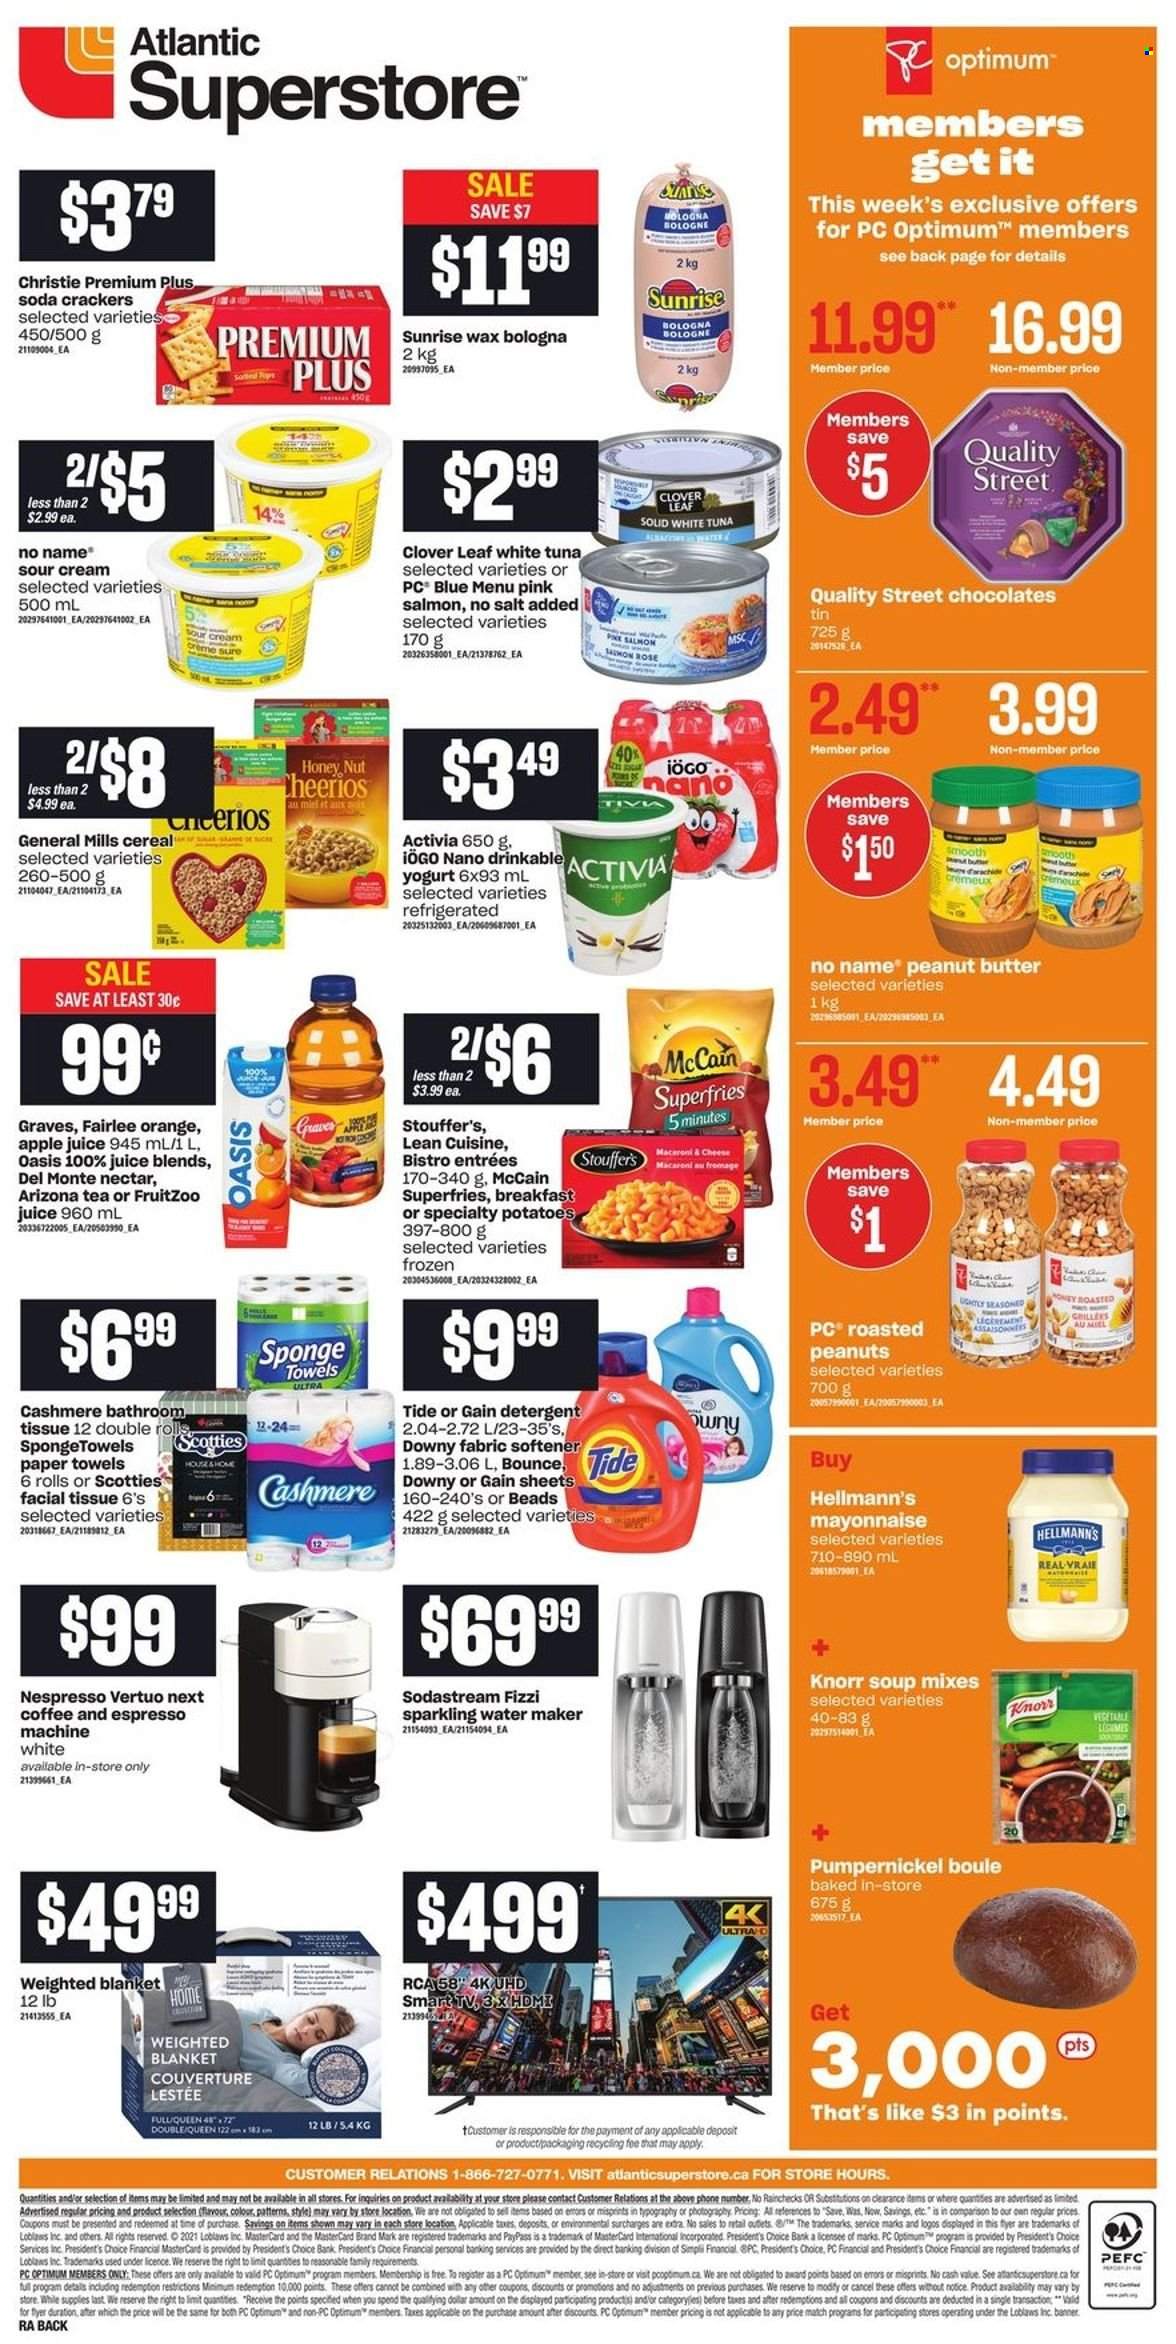 thumbnail - Atlantic Superstore Flyer - November 25, 2021 - December 01, 2021 - Sales products - potatoes, salmon, tuna, No Name, soup, Lean Cuisine, bologna sausage, cheese, Président, yoghurt, Clover, Activia, sour cream, mayonnaise, Hellmann’s, Stouffer's, McCain, potato fries, chocolate, crackers, cereals, Cheerios, peanut butter, peanuts, apple juice, juice, AriZona, tea, coffee, Nespresso, rosé wine, bath tissue, kitchen towels, paper towels, Gain, Tide, fabric softener, Bounce, Downy Laundry, blanket, Optimum, rose, Knorr, detergent. Page 2.